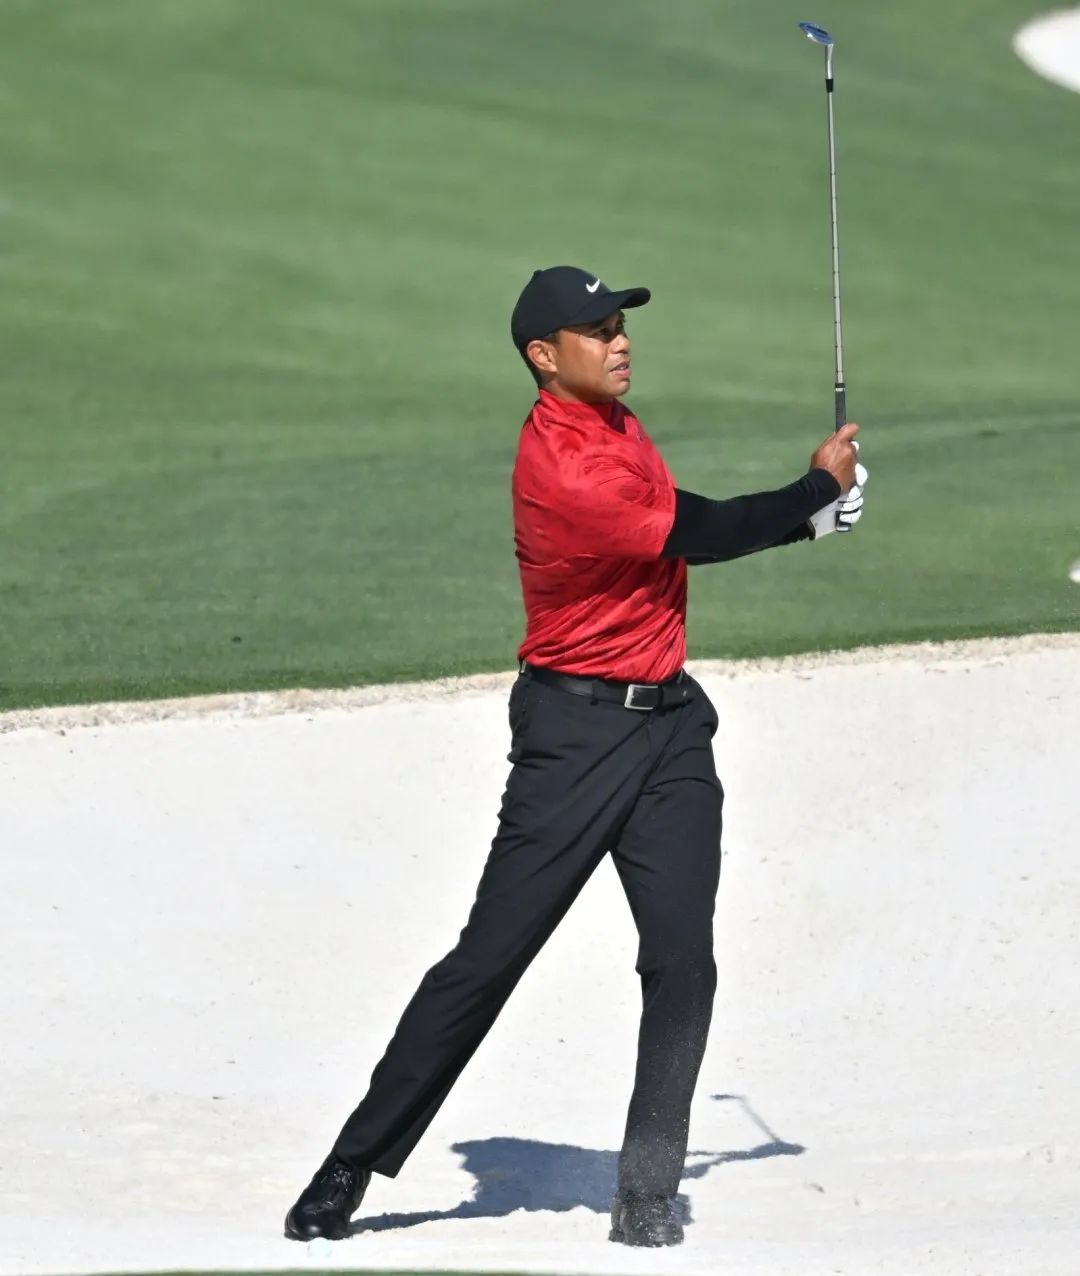 The world cheers for the tough - Tiger Woods returns after 508 days!